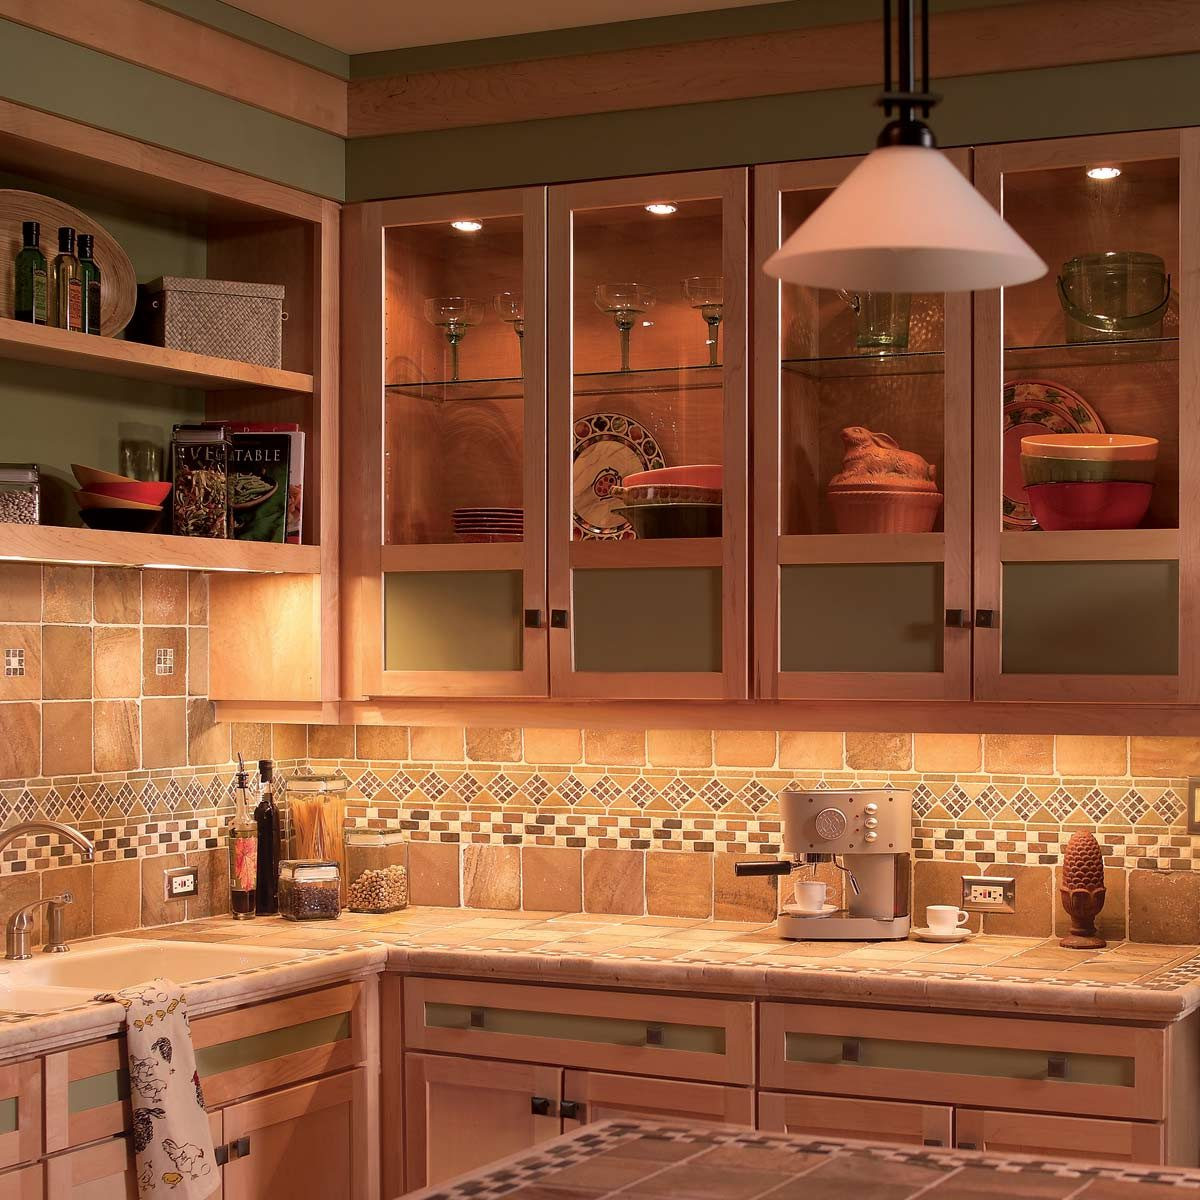 Kitchen Cabinet Light
 How to Install Under Cabinet Lighting in Your Kitchen